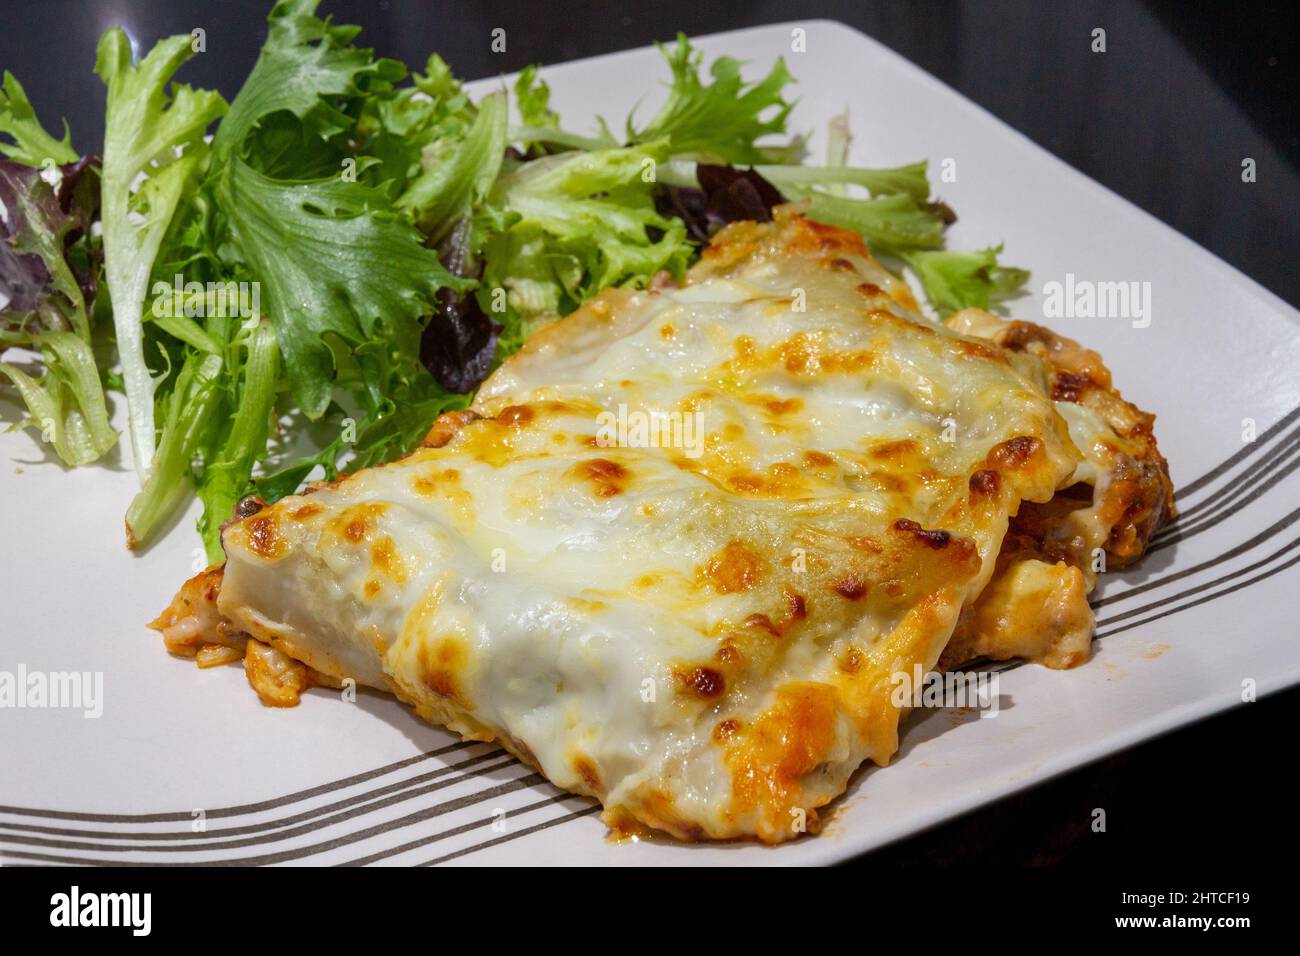 Plated Lasagne with salad Stock Photo